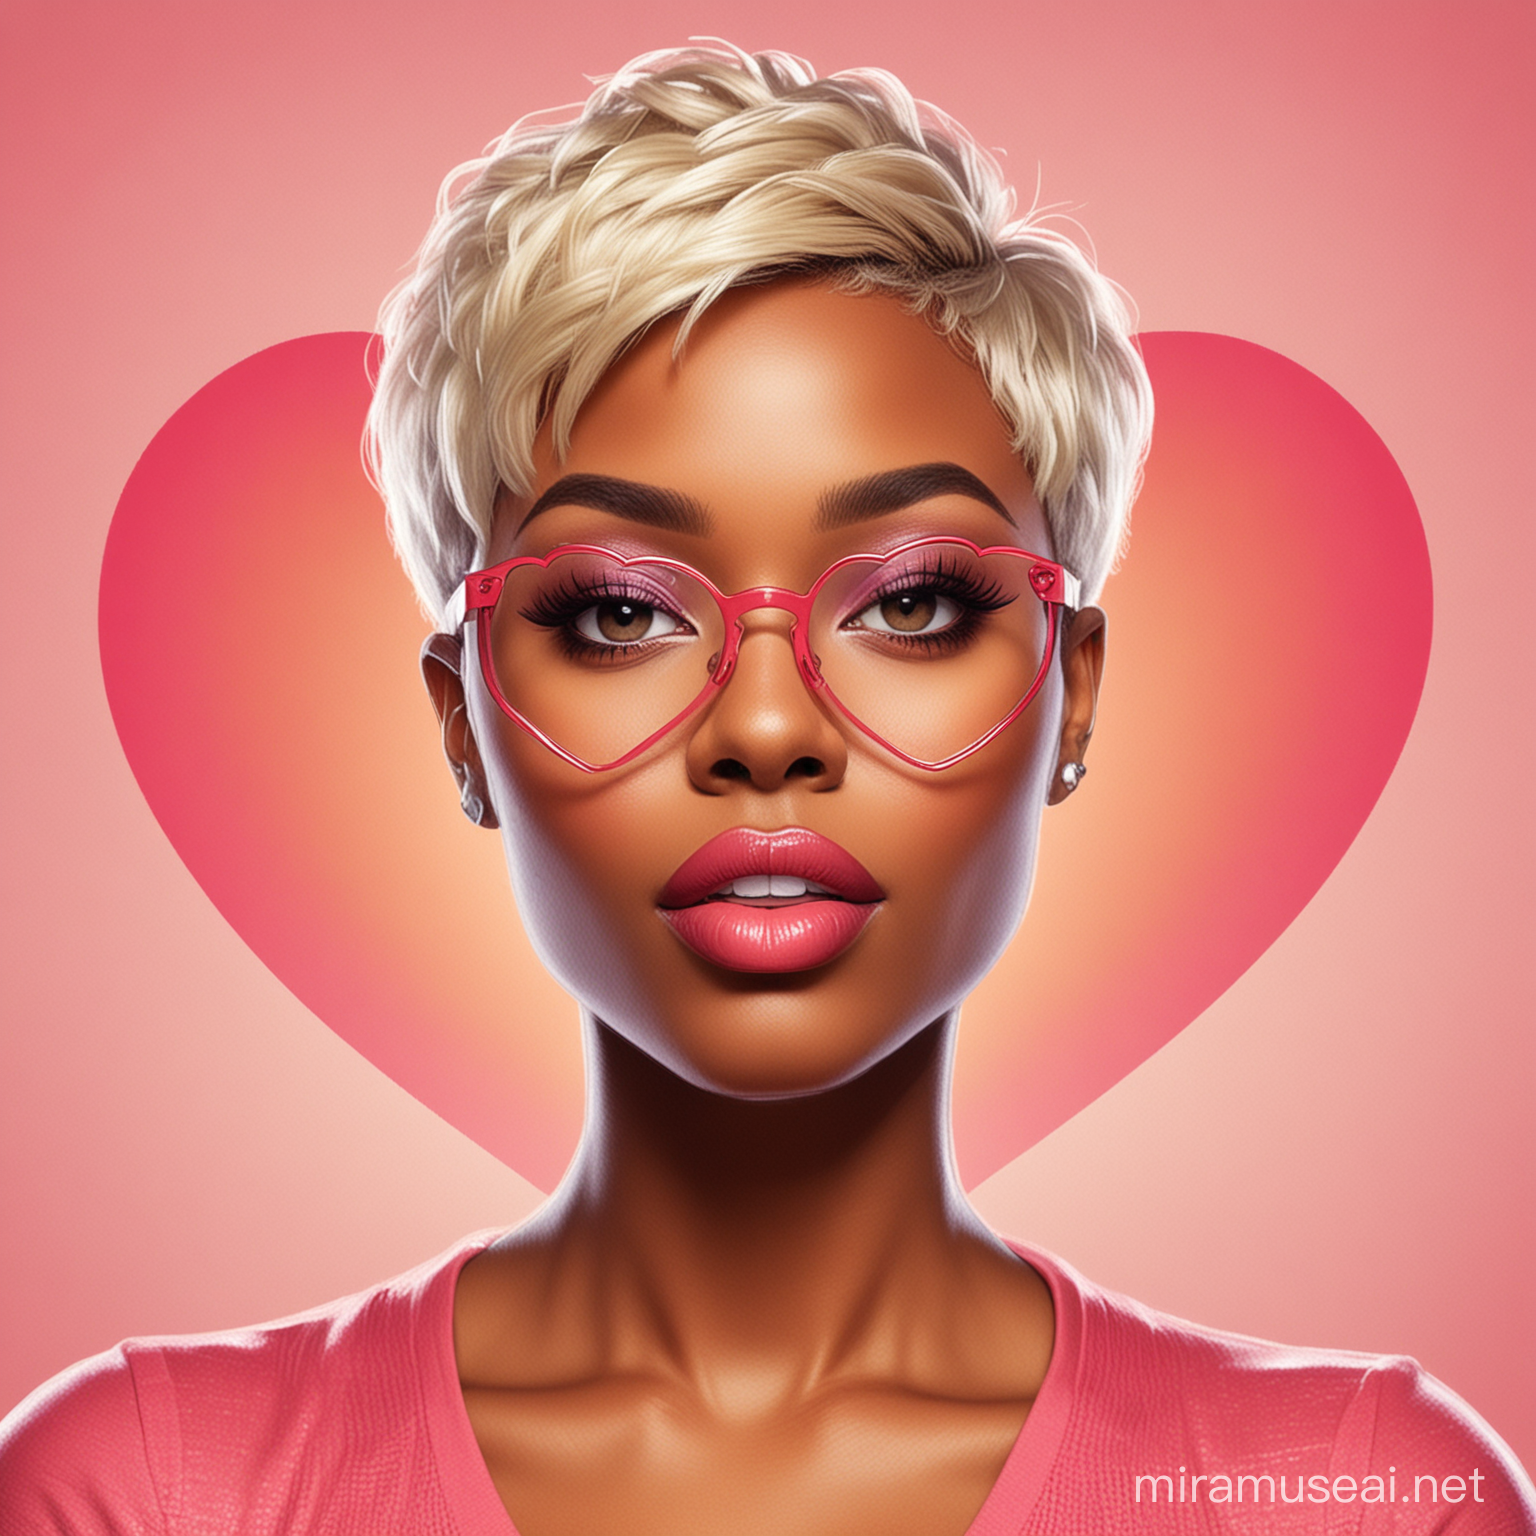 Vibrant Illustration of Stylish African American Woman with Heartshaped Glasses